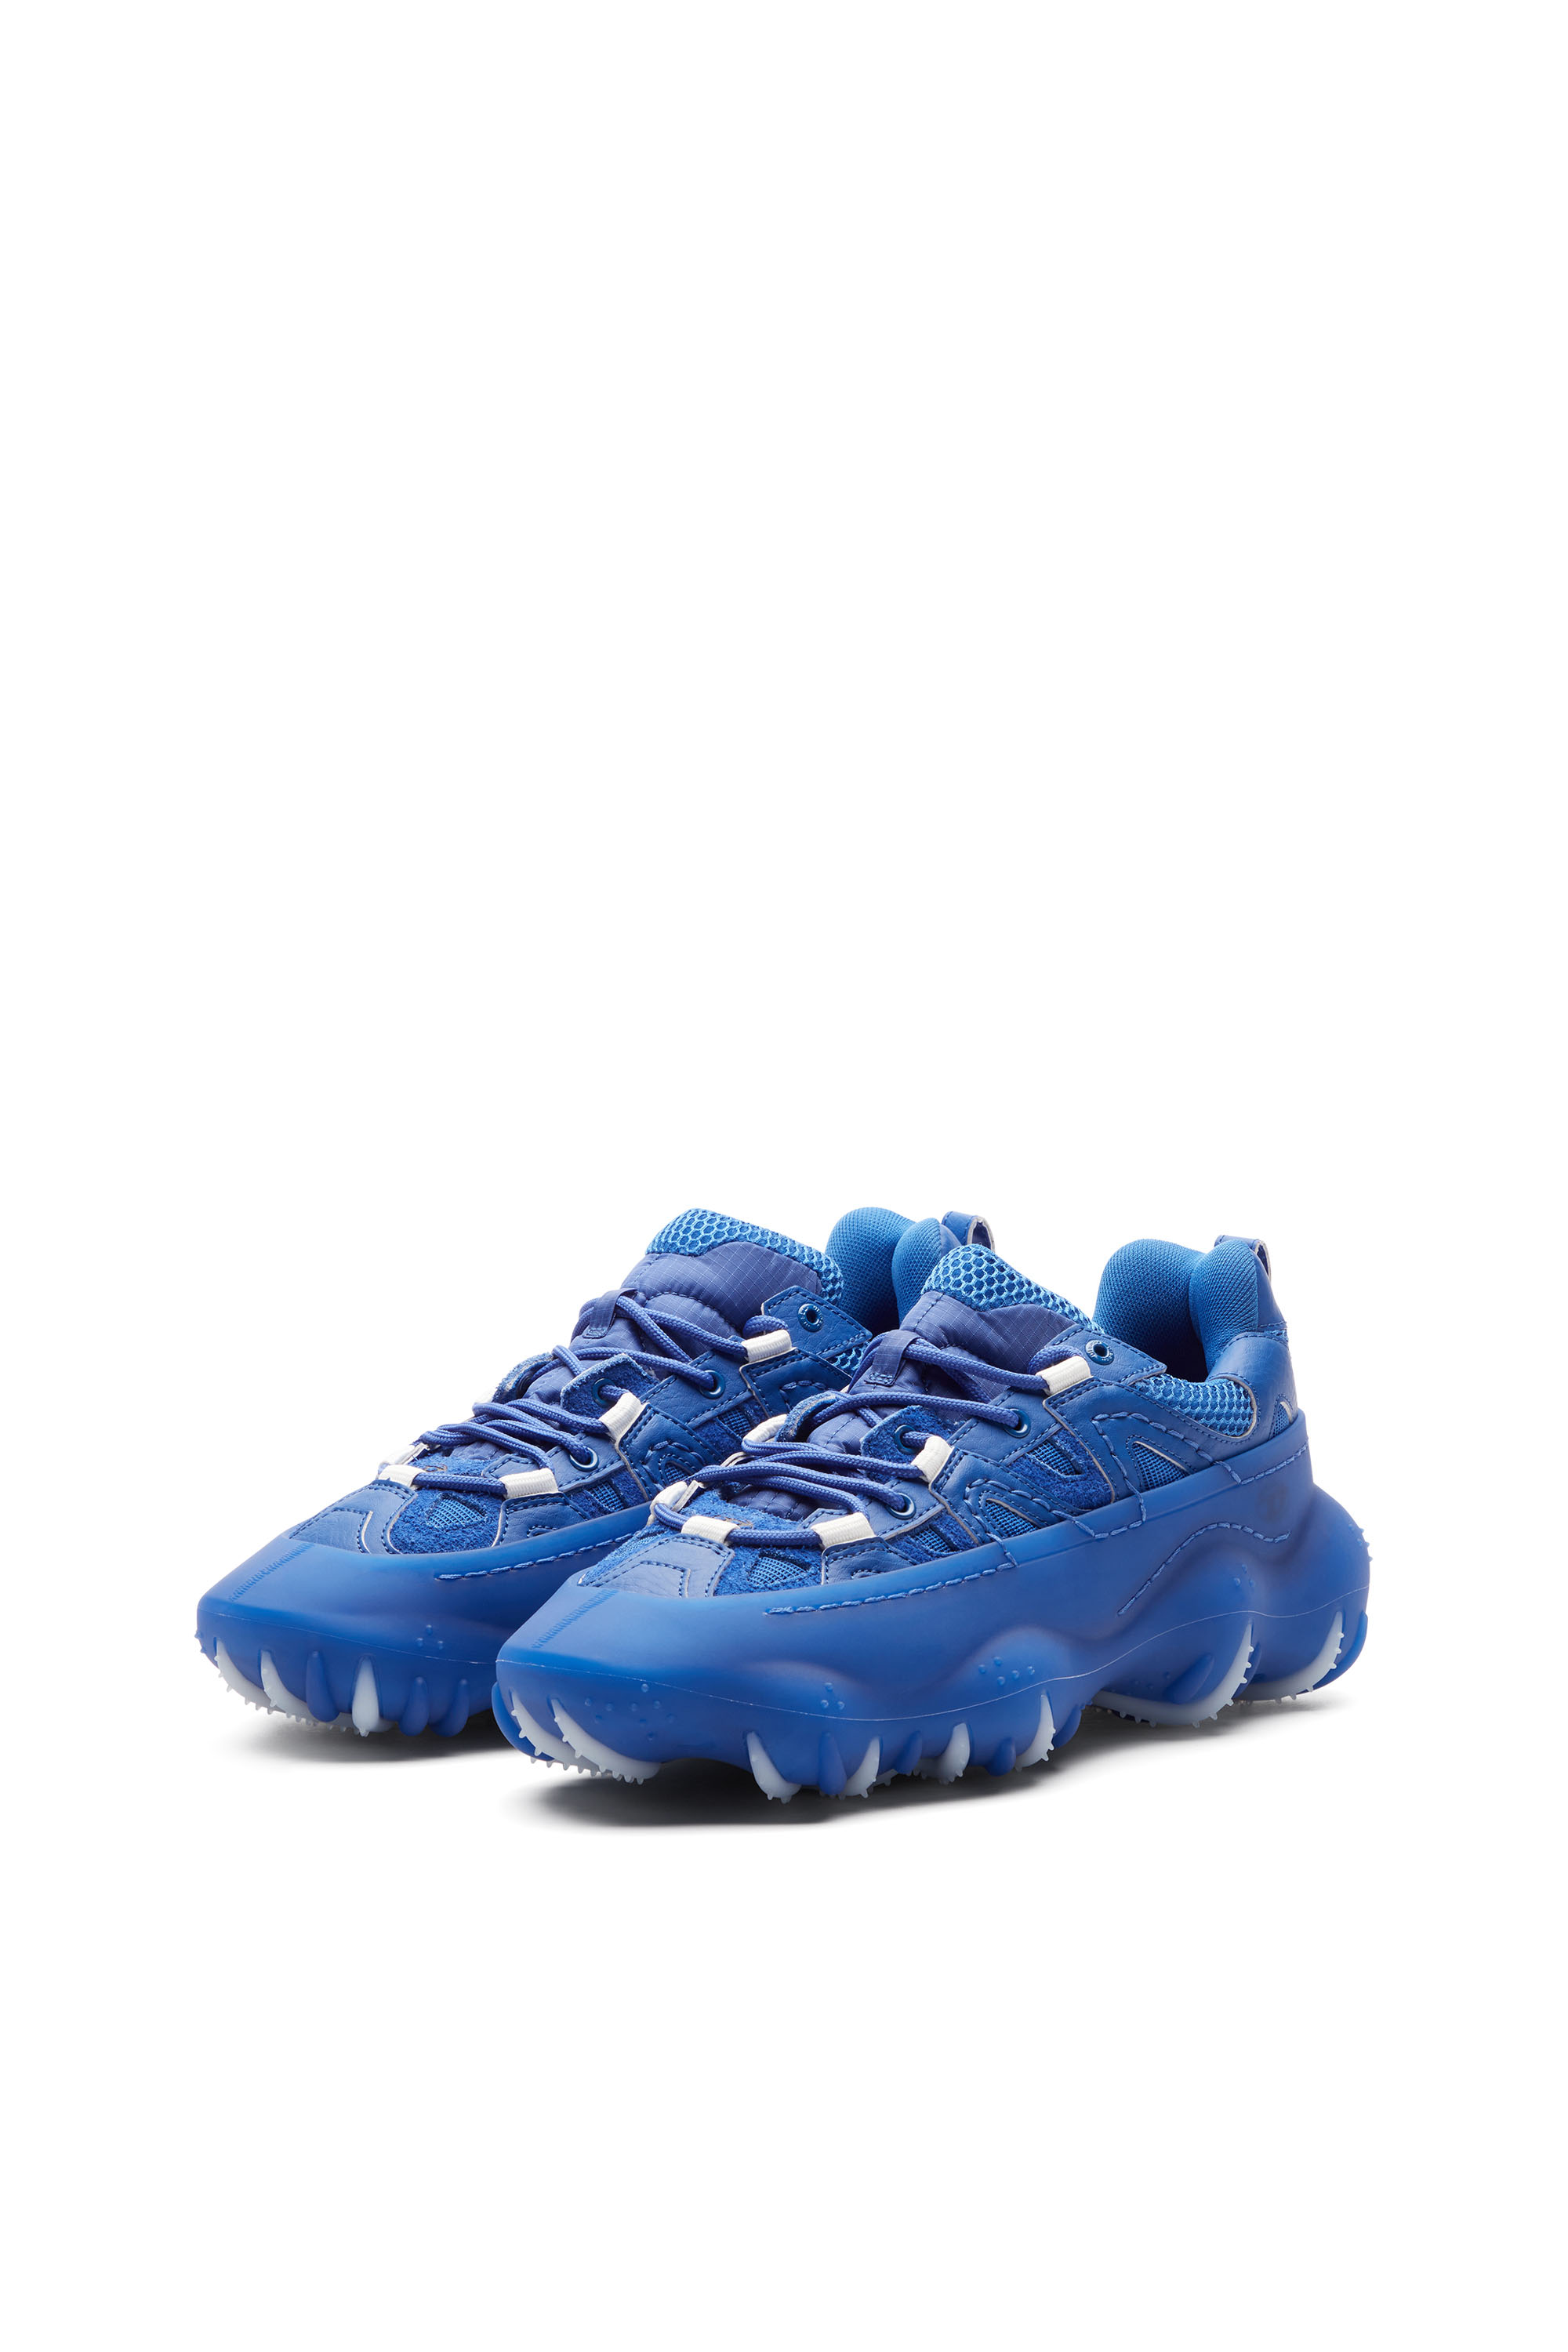 Diesel - S-PROTOTYPE P1, Man S-Prototype P1-Low-top sneakers with rubber overlay in Blue - Image 8